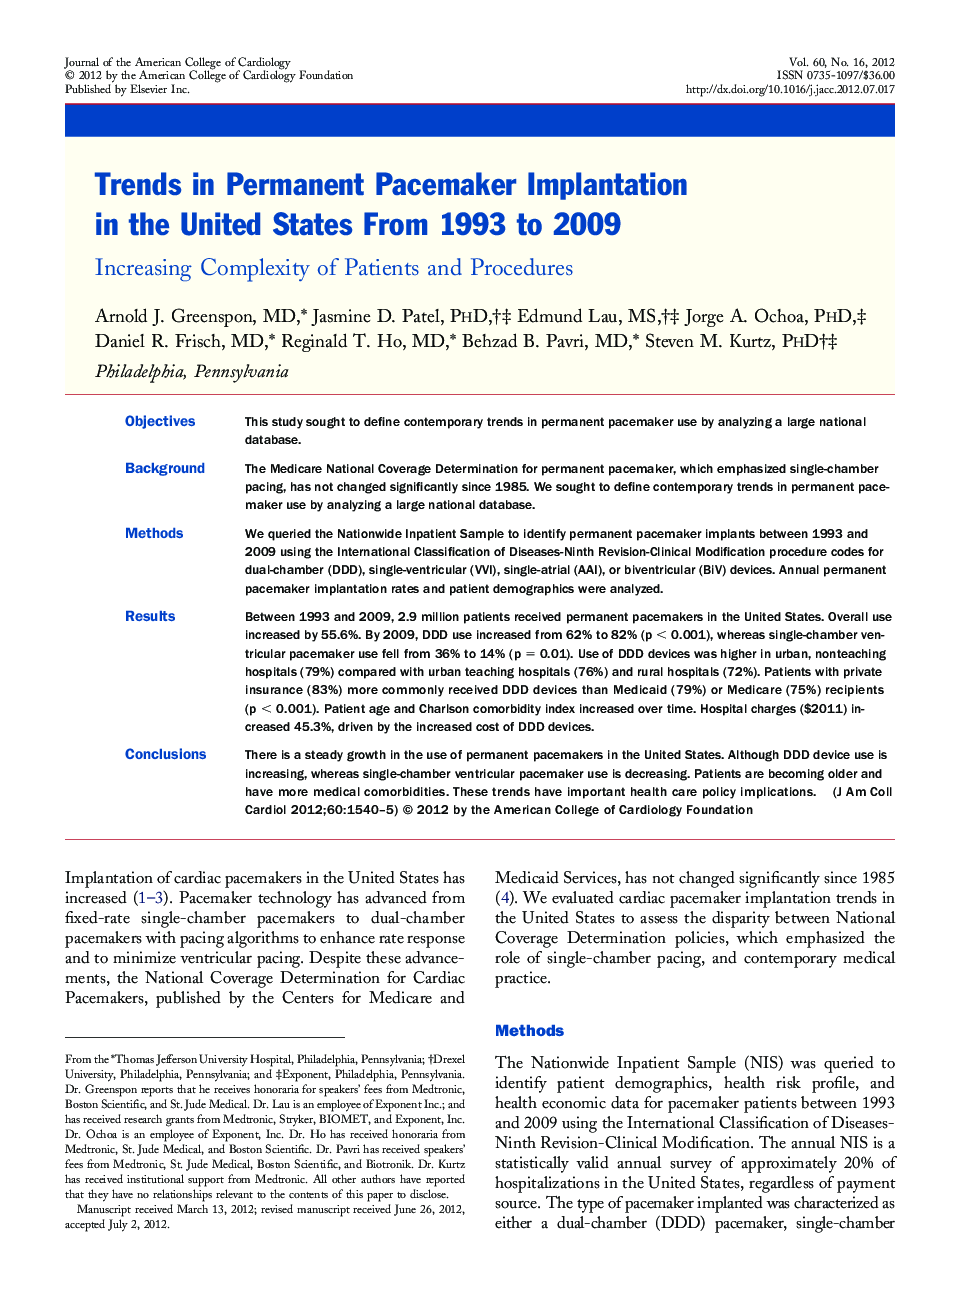 Trends in Permanent Pacemaker Implantation in the United States From 1993 to 2009 : Increasing Complexity of Patients and Procedures